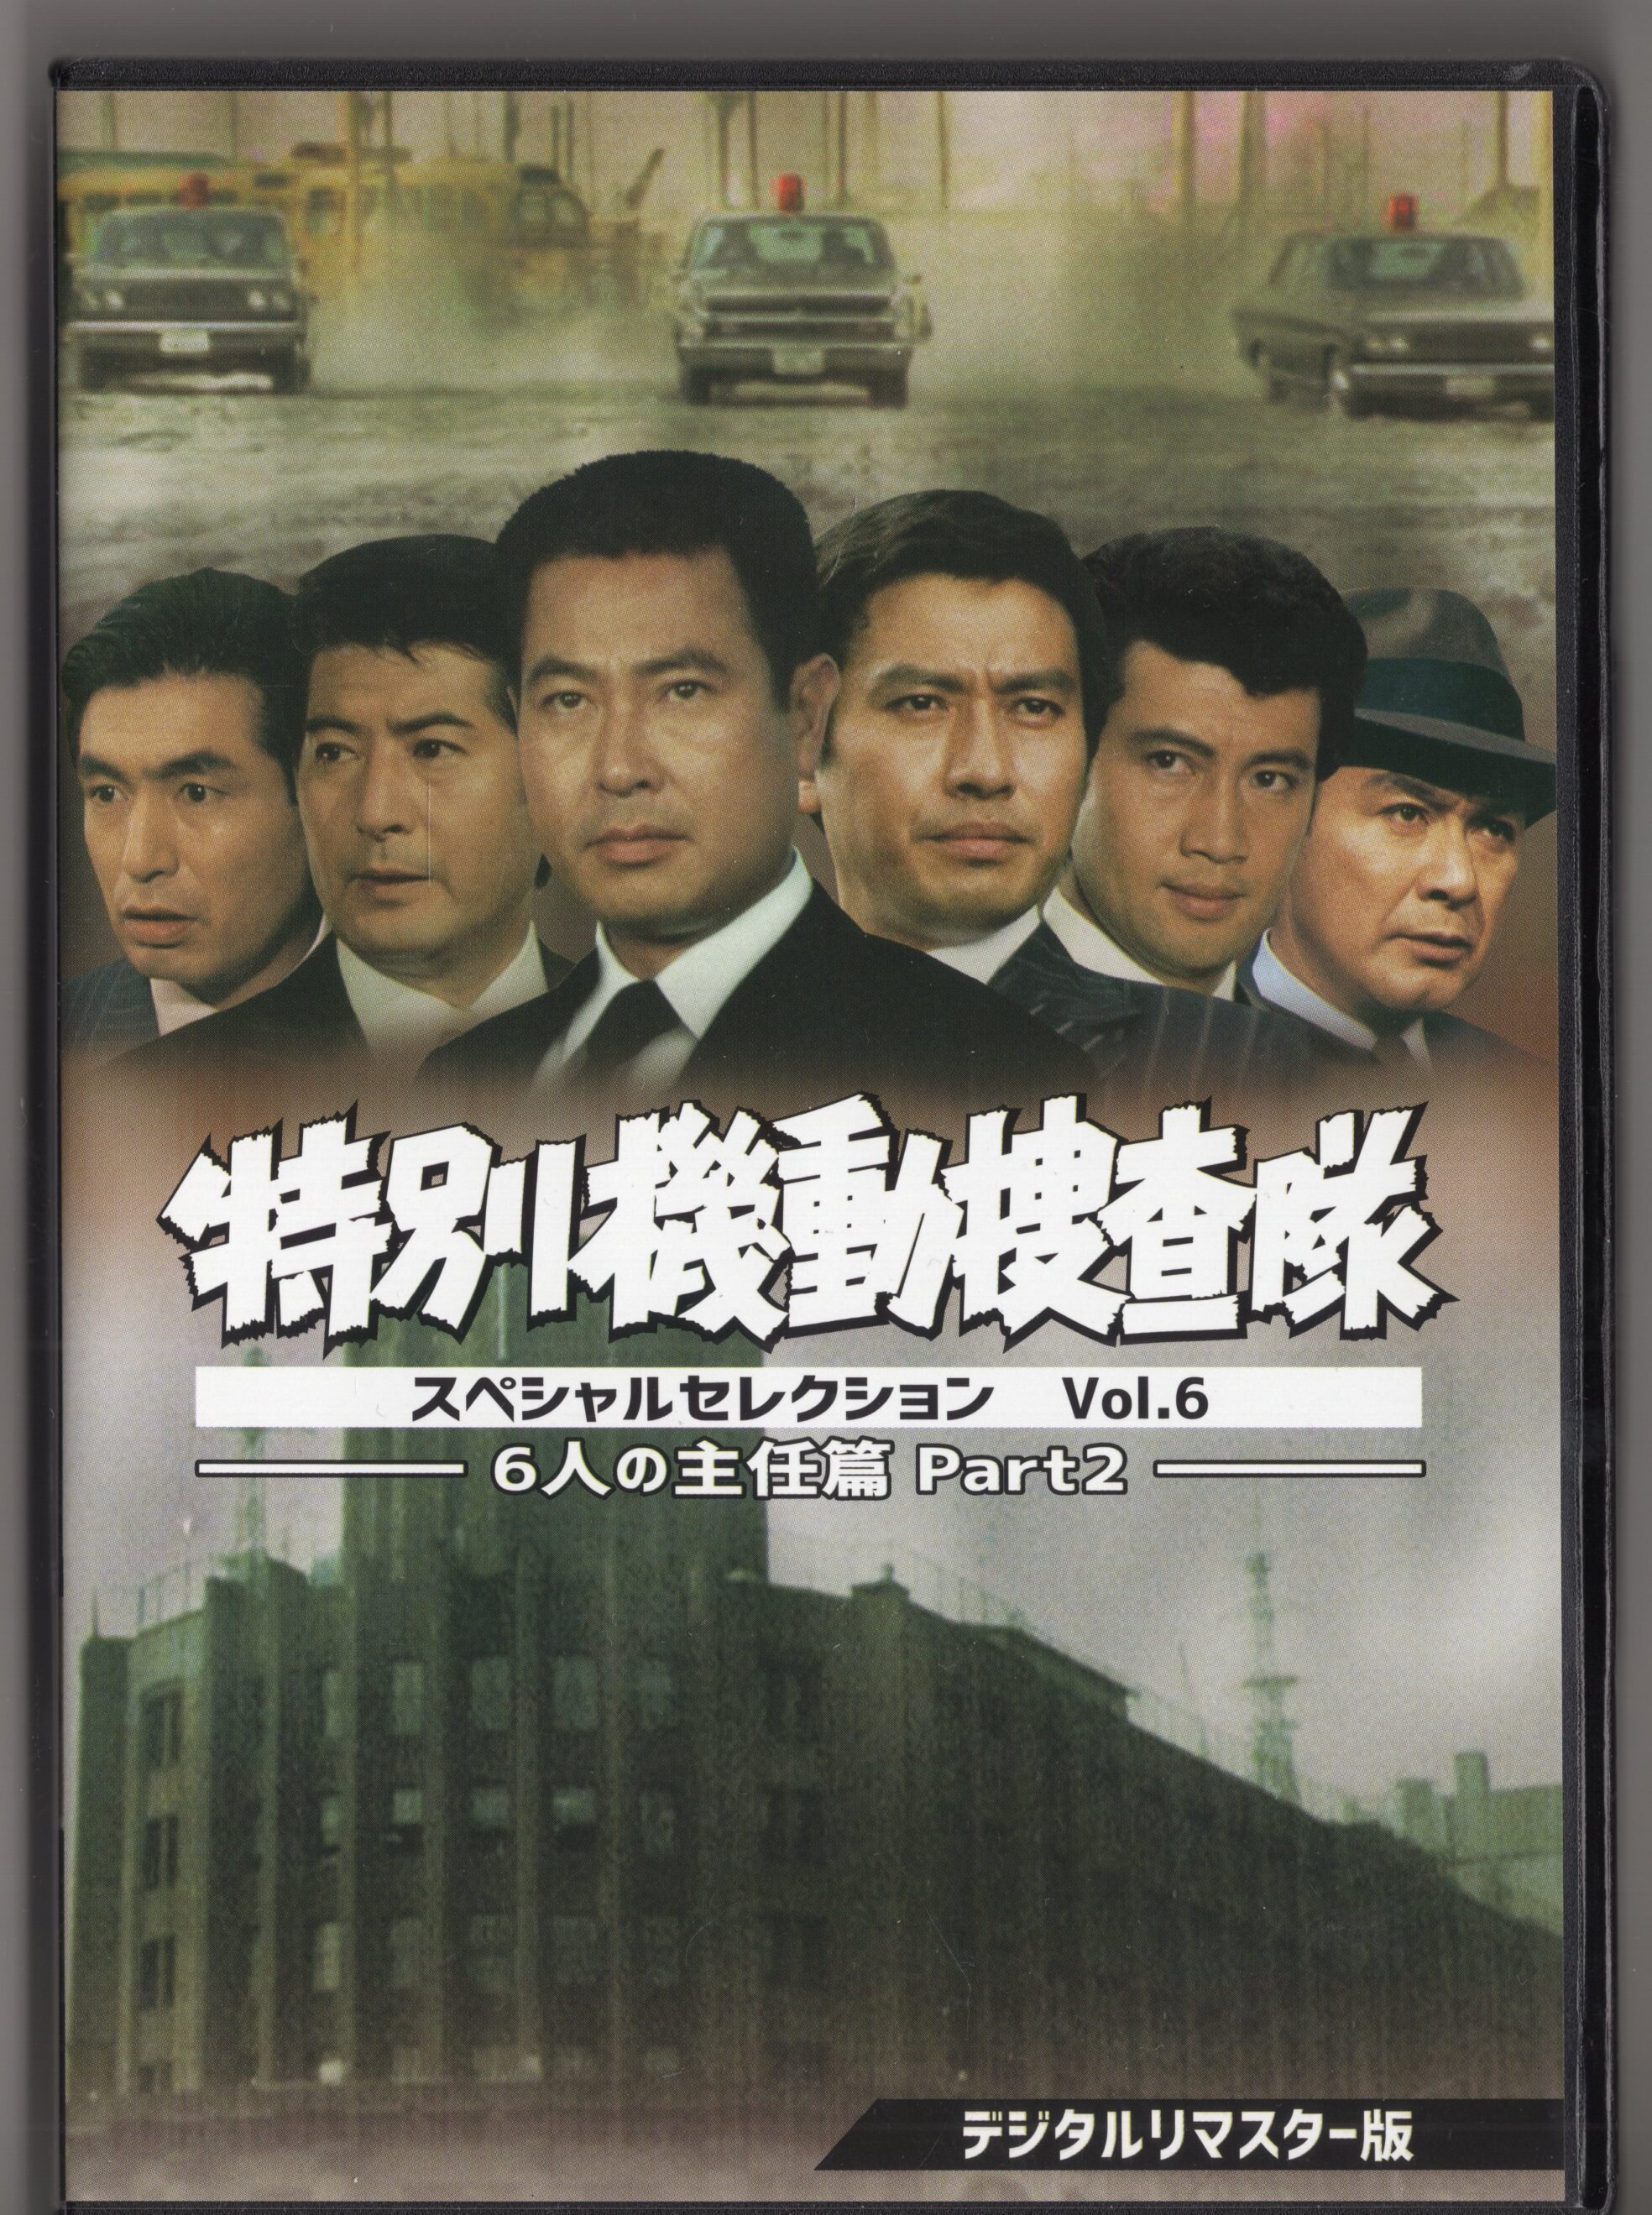 Drama DVD Special Mobile Investigation Team Special Selection-Six